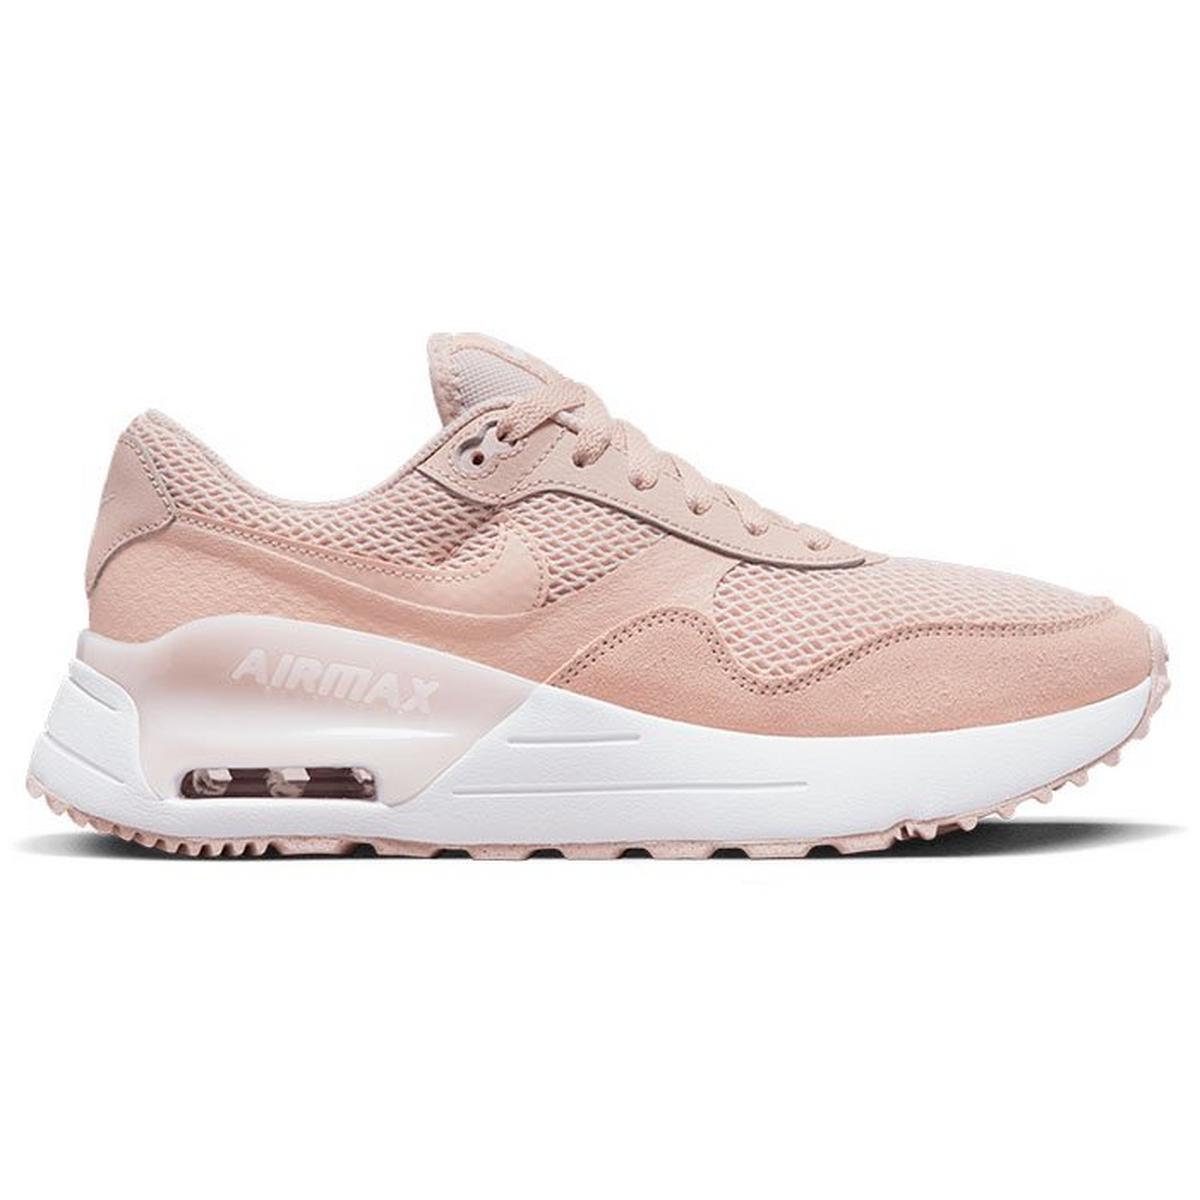 Chaussures Air Max SYSTM pour femmes